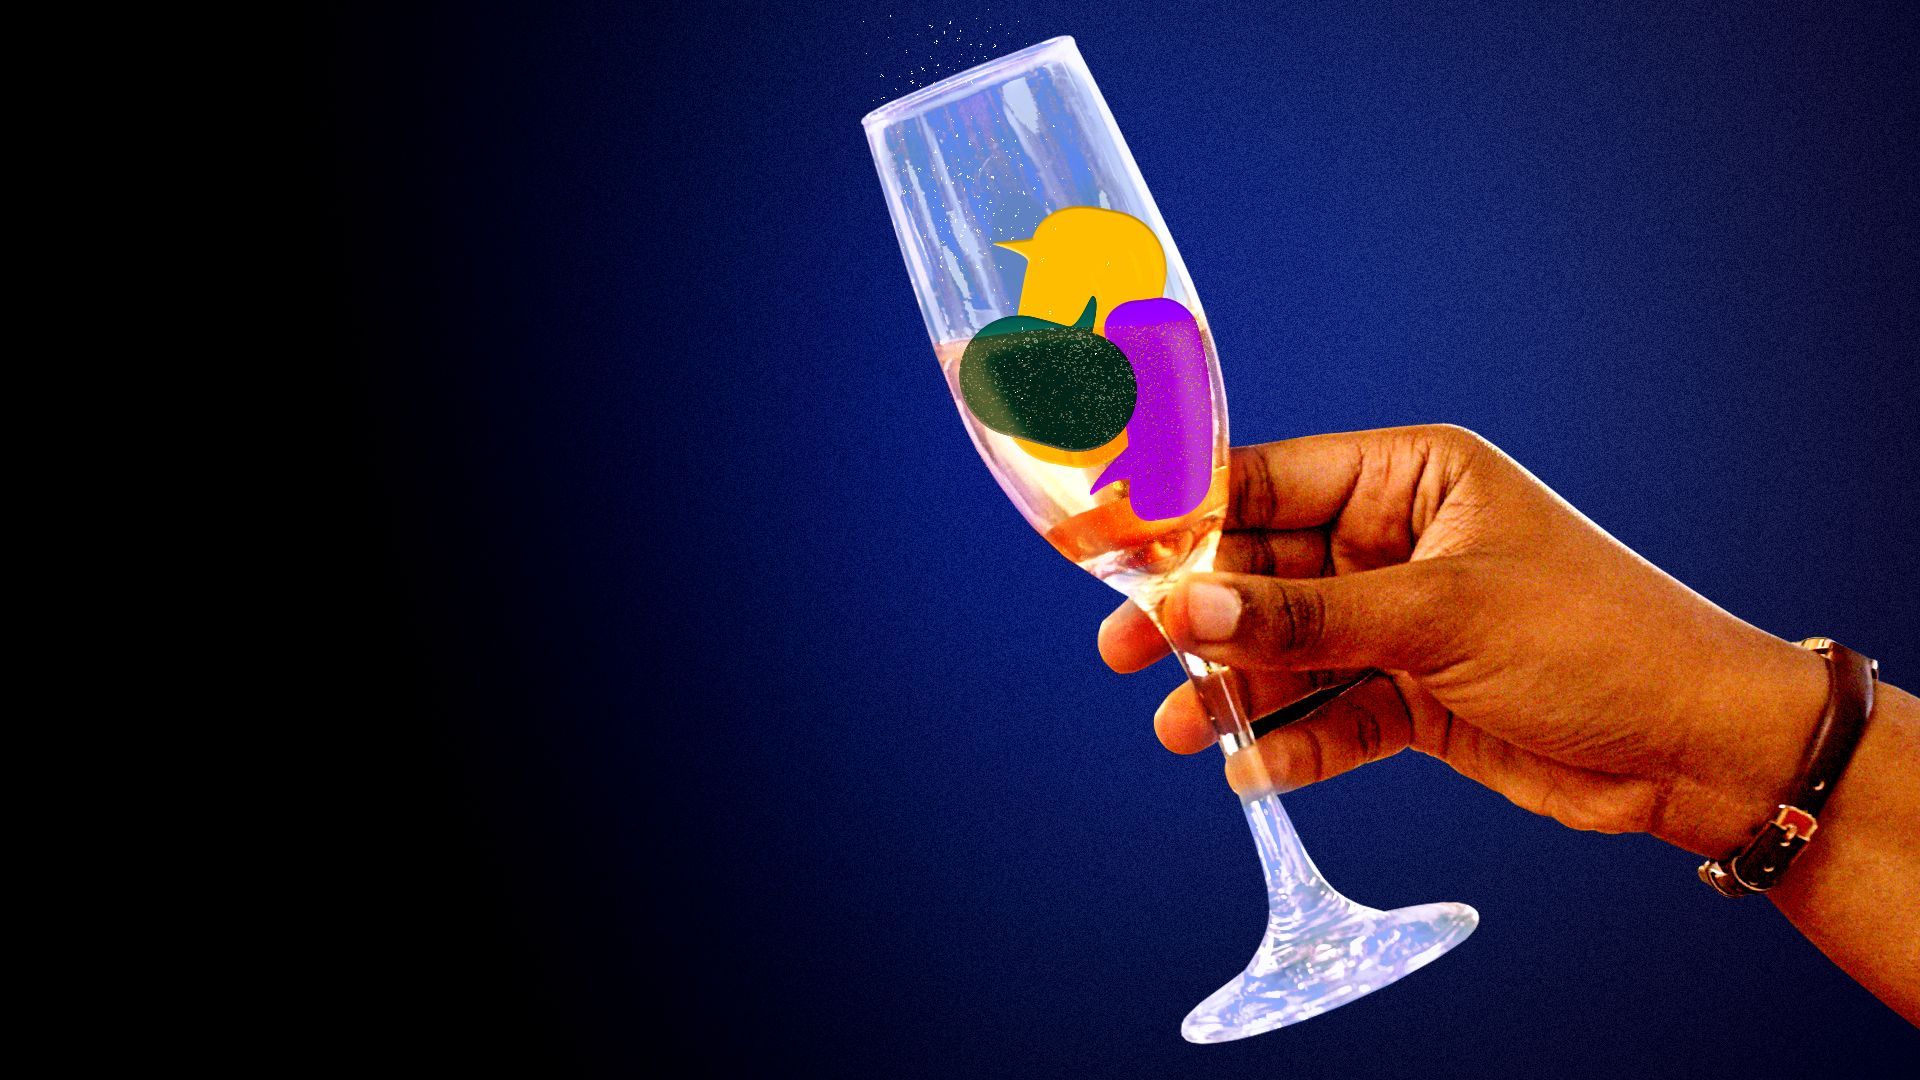 Illustration of a hand toasting with a champagne glass that is filled with small speech bubbles.